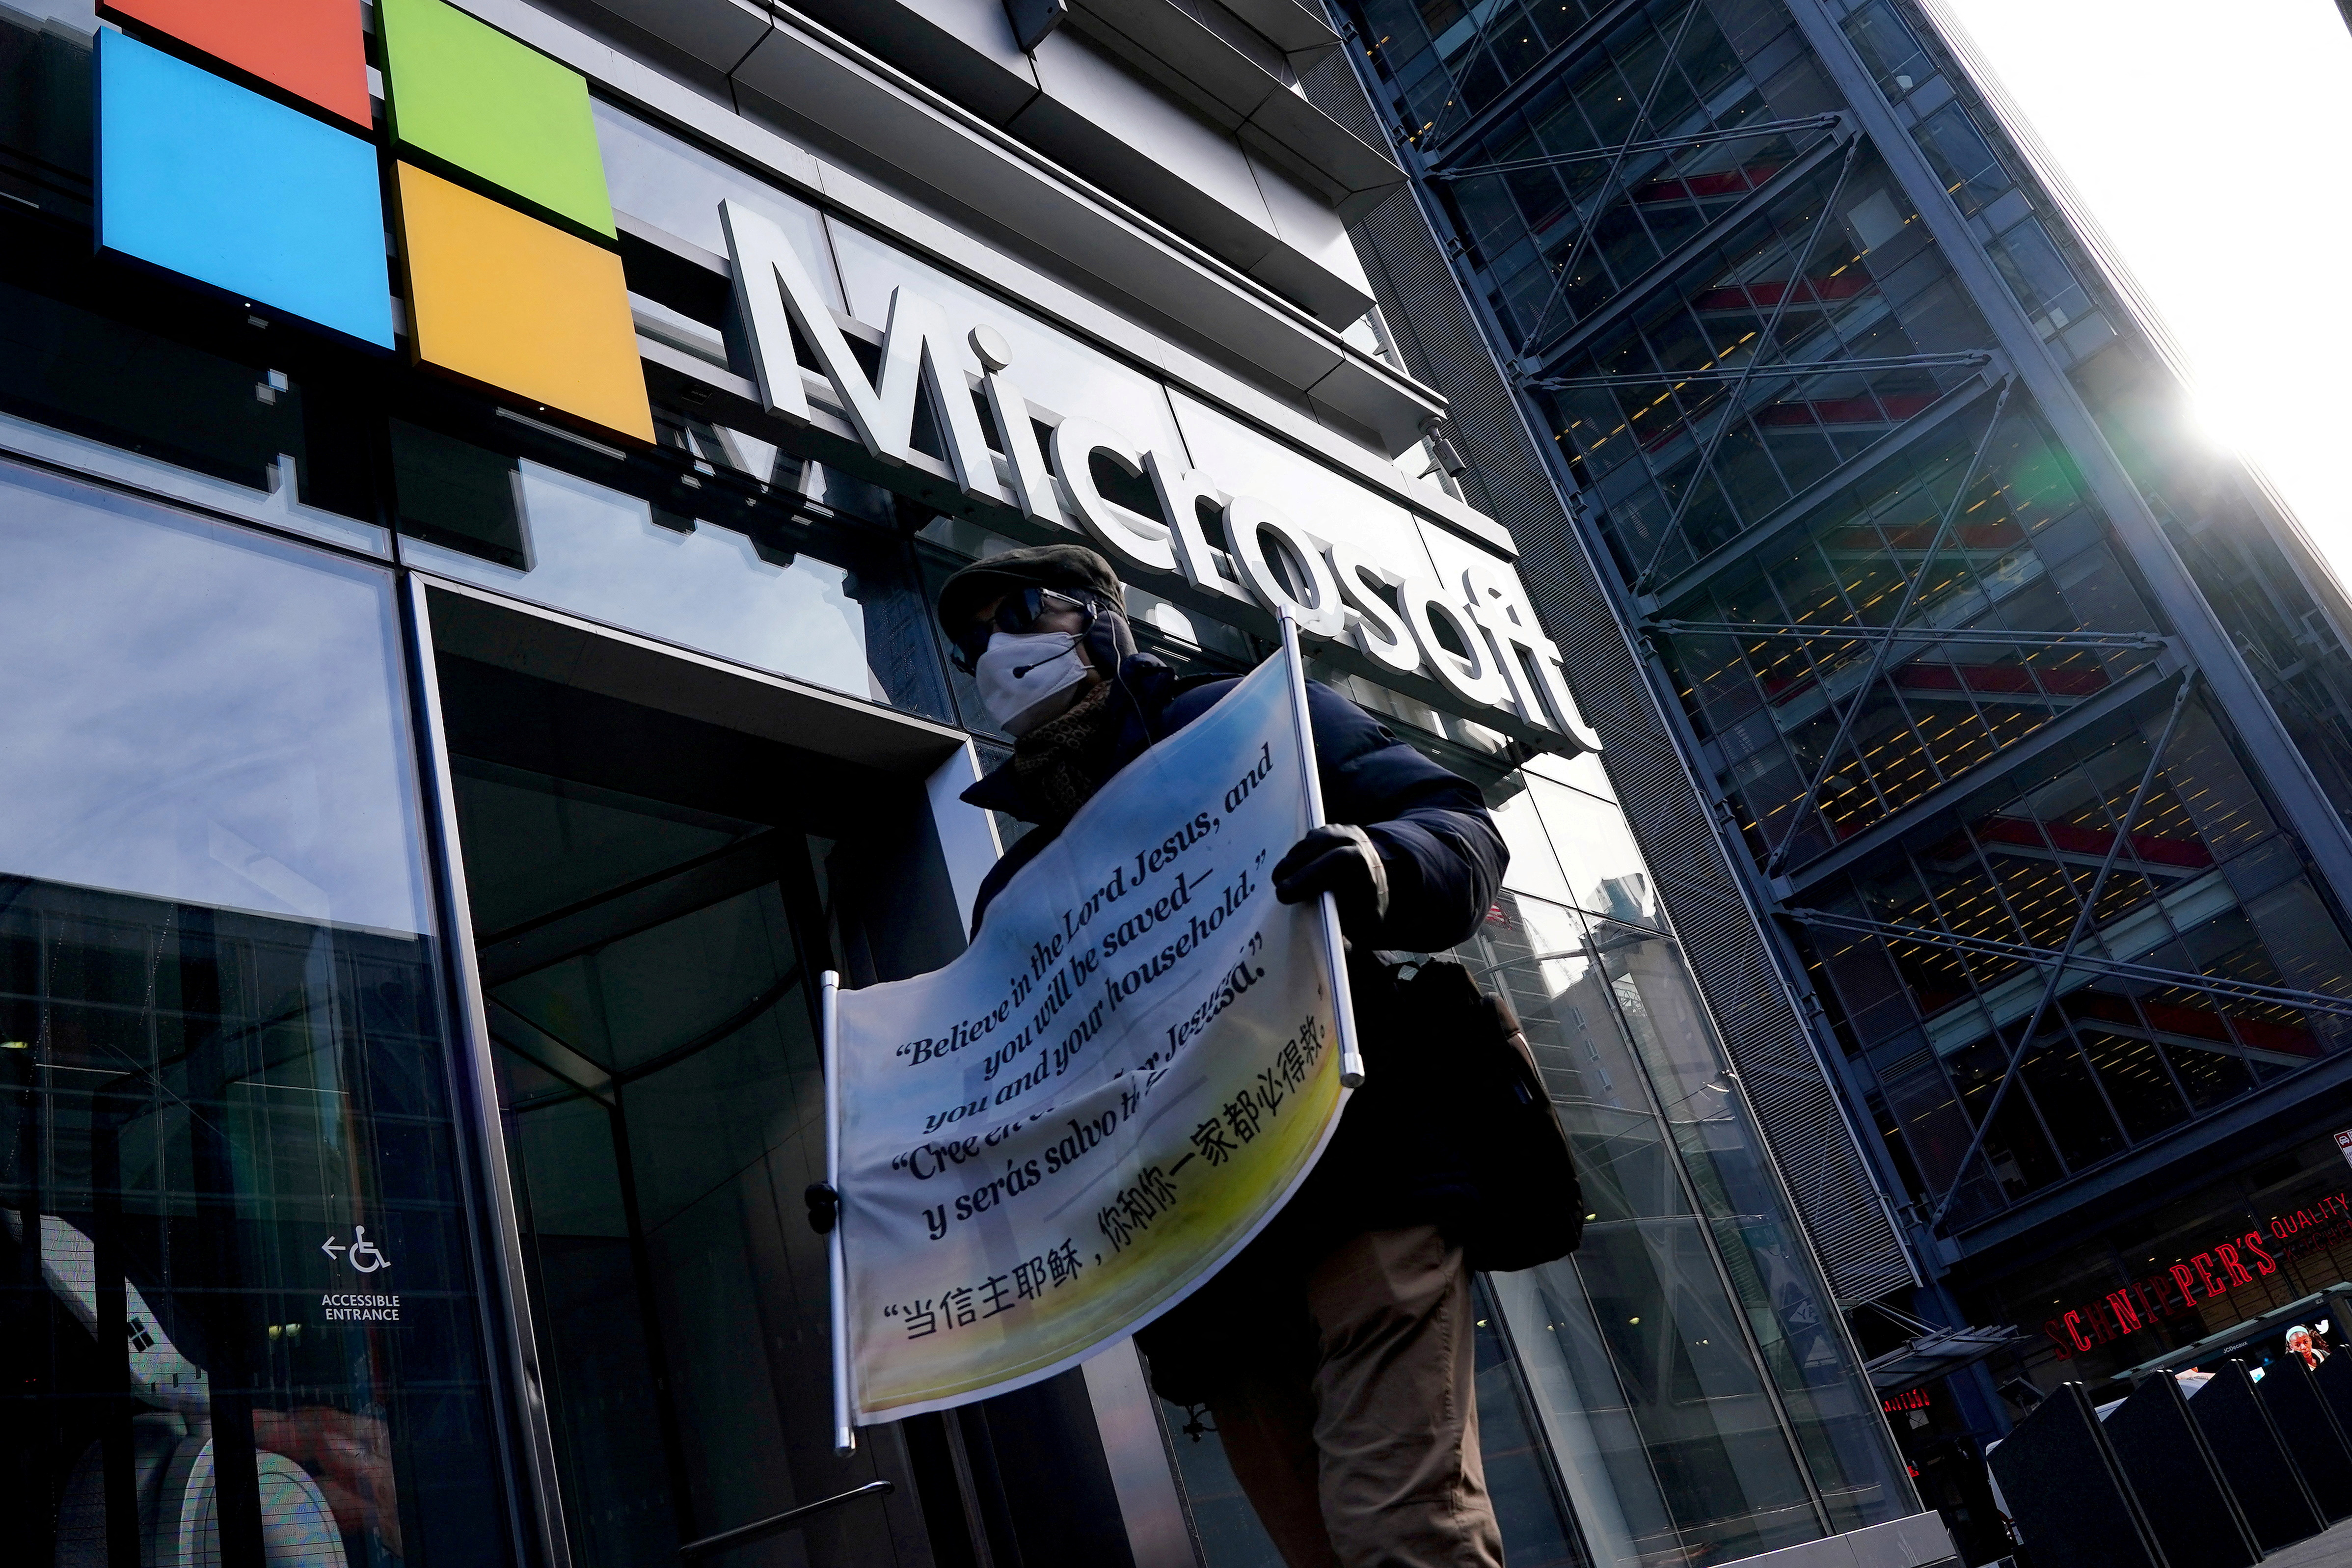 Microsoft buys Activision, in New York City